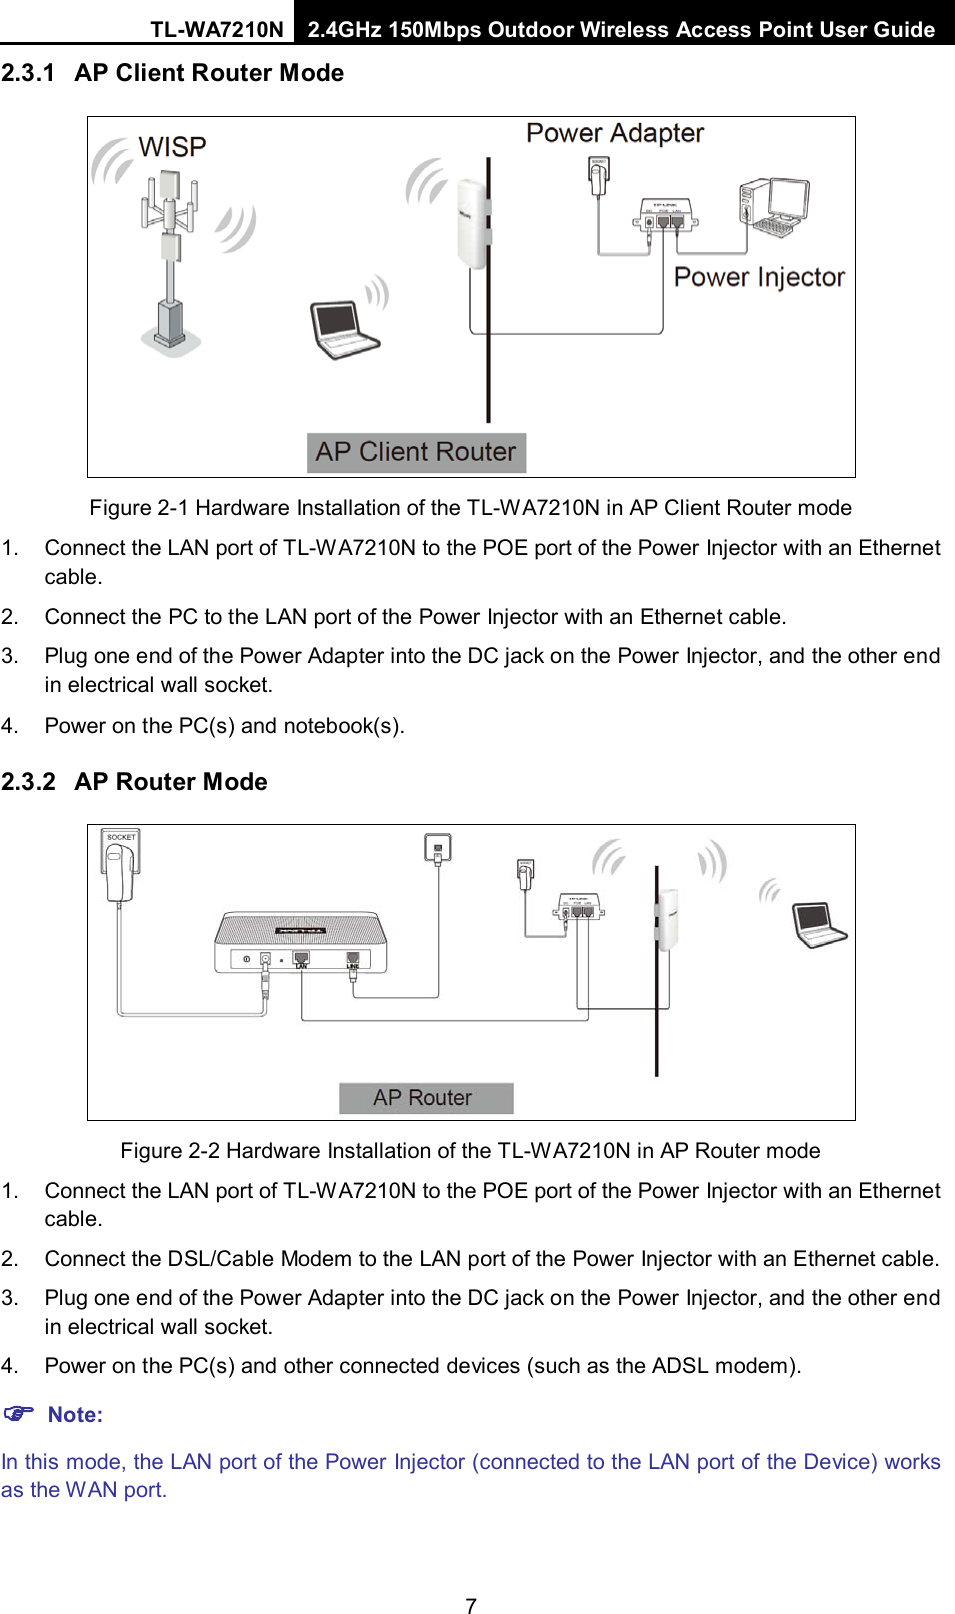 TL-WA7210N 2.4GHz 150Mbps Outdoor Wireless Access Point User Guide  7 2.3.1 AP Client Router Mode  Figure 2-1 Hardware Installation of the TL-WA7210N in AP Client Router mode 1. Connect the LAN port of TL-WA7210N to the POE port of the Power Injector with an Ethernet cable. 2. Connect the PC to the LAN port of the Power Injector with an Ethernet cable. 3. Plug one end of the Power Adapter into the DC jack on the Power Injector, and the other end in electrical wall socket. 4. Power on the PC(s) and notebook(s). 2.3.2 AP Router Mode  Figure 2-2 Hardware Installation of the TL-WA7210N in AP Router mode 1. Connect the LAN port of TL-WA7210N to the POE port of the Power Injector with an Ethernet cable. 2. Connect the DSL/Cable Modem to the LAN port of the Power Injector with an Ethernet cable. 3. Plug one end of the Power Adapter into the DC jack on the Power Injector, and the other end in electrical wall socket. 4. Power on the PC(s) and other connected devices (such as the ADSL modem).  Note: In this mode, the LAN port of the Power Injector (connected to the LAN port of the Device) works as the WAN port.  